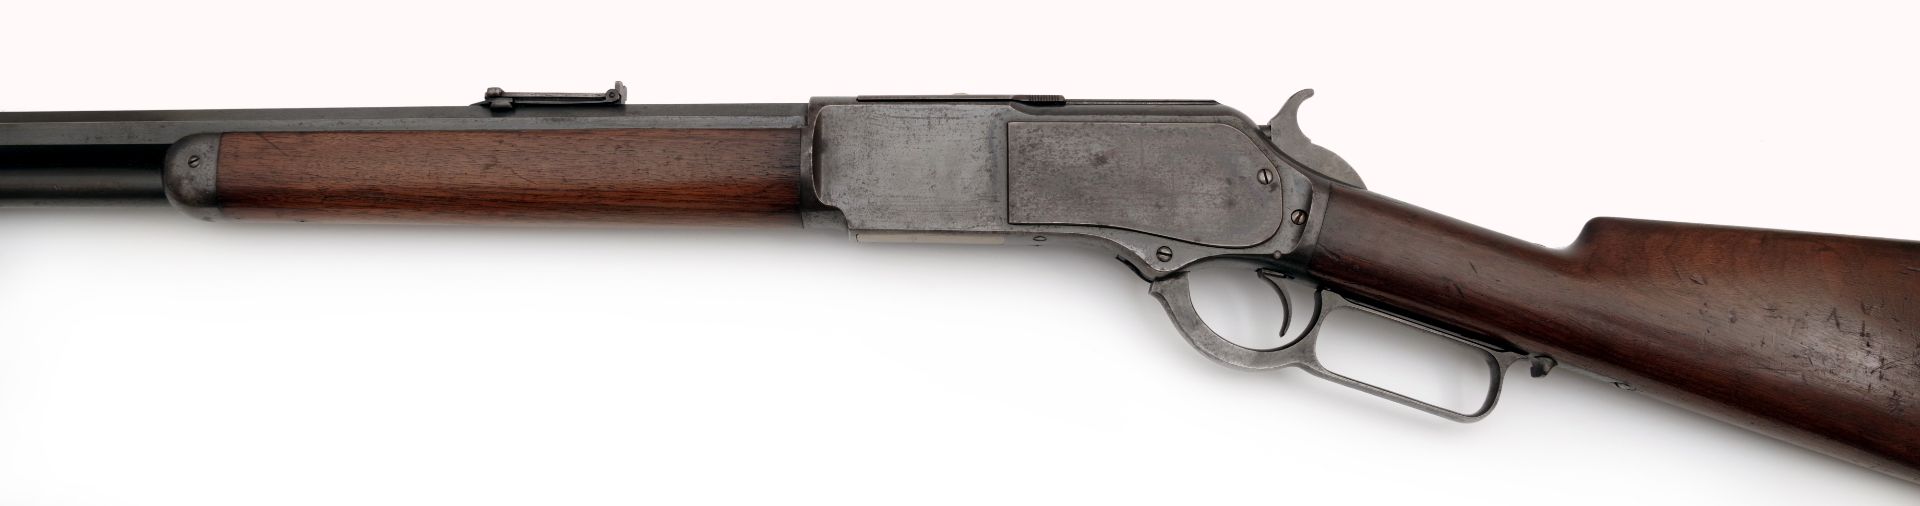 Winchester Sporting Rifle| Mod. 1876